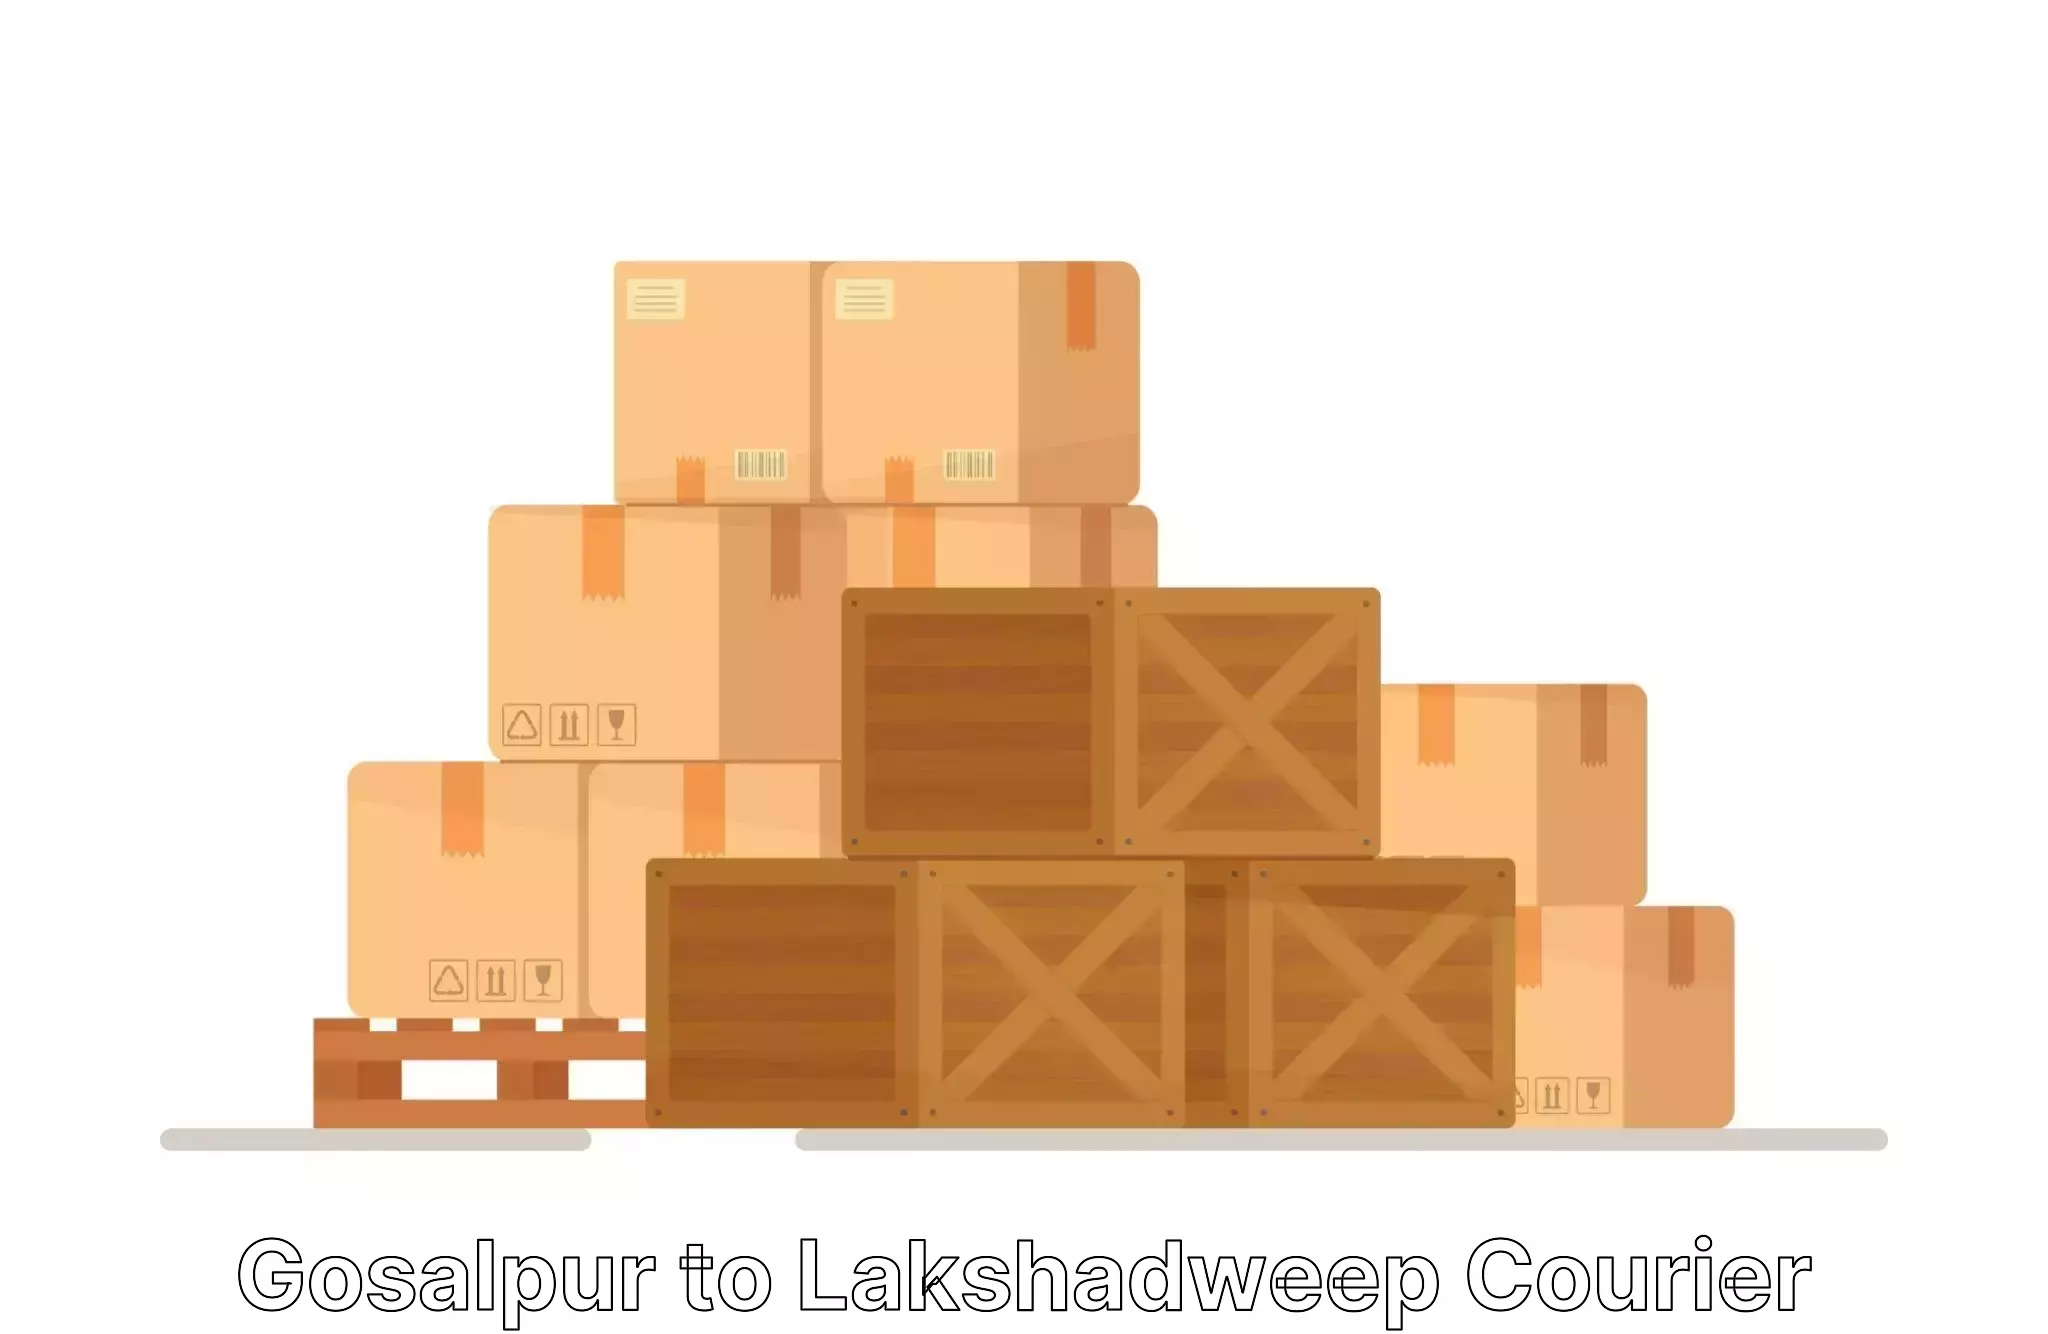 Affordable relocation solutions in Gosalpur to Lakshadweep